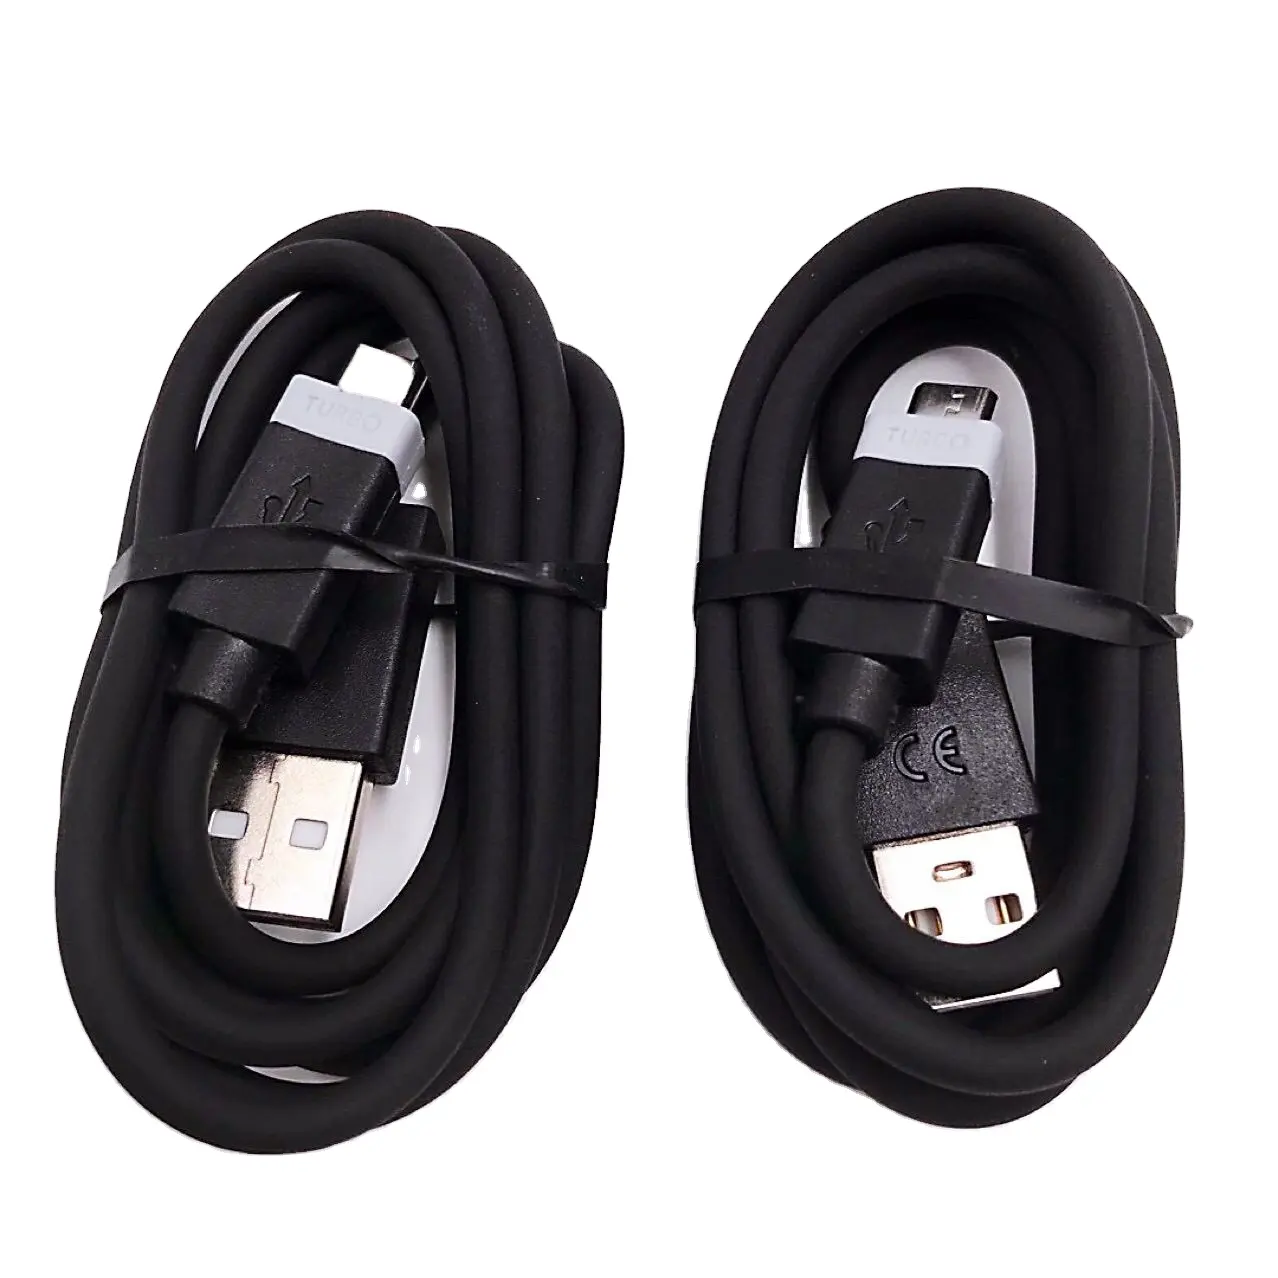 High-grade android usb cable type c fast cable mobile phone micro usb charging cable for motorola